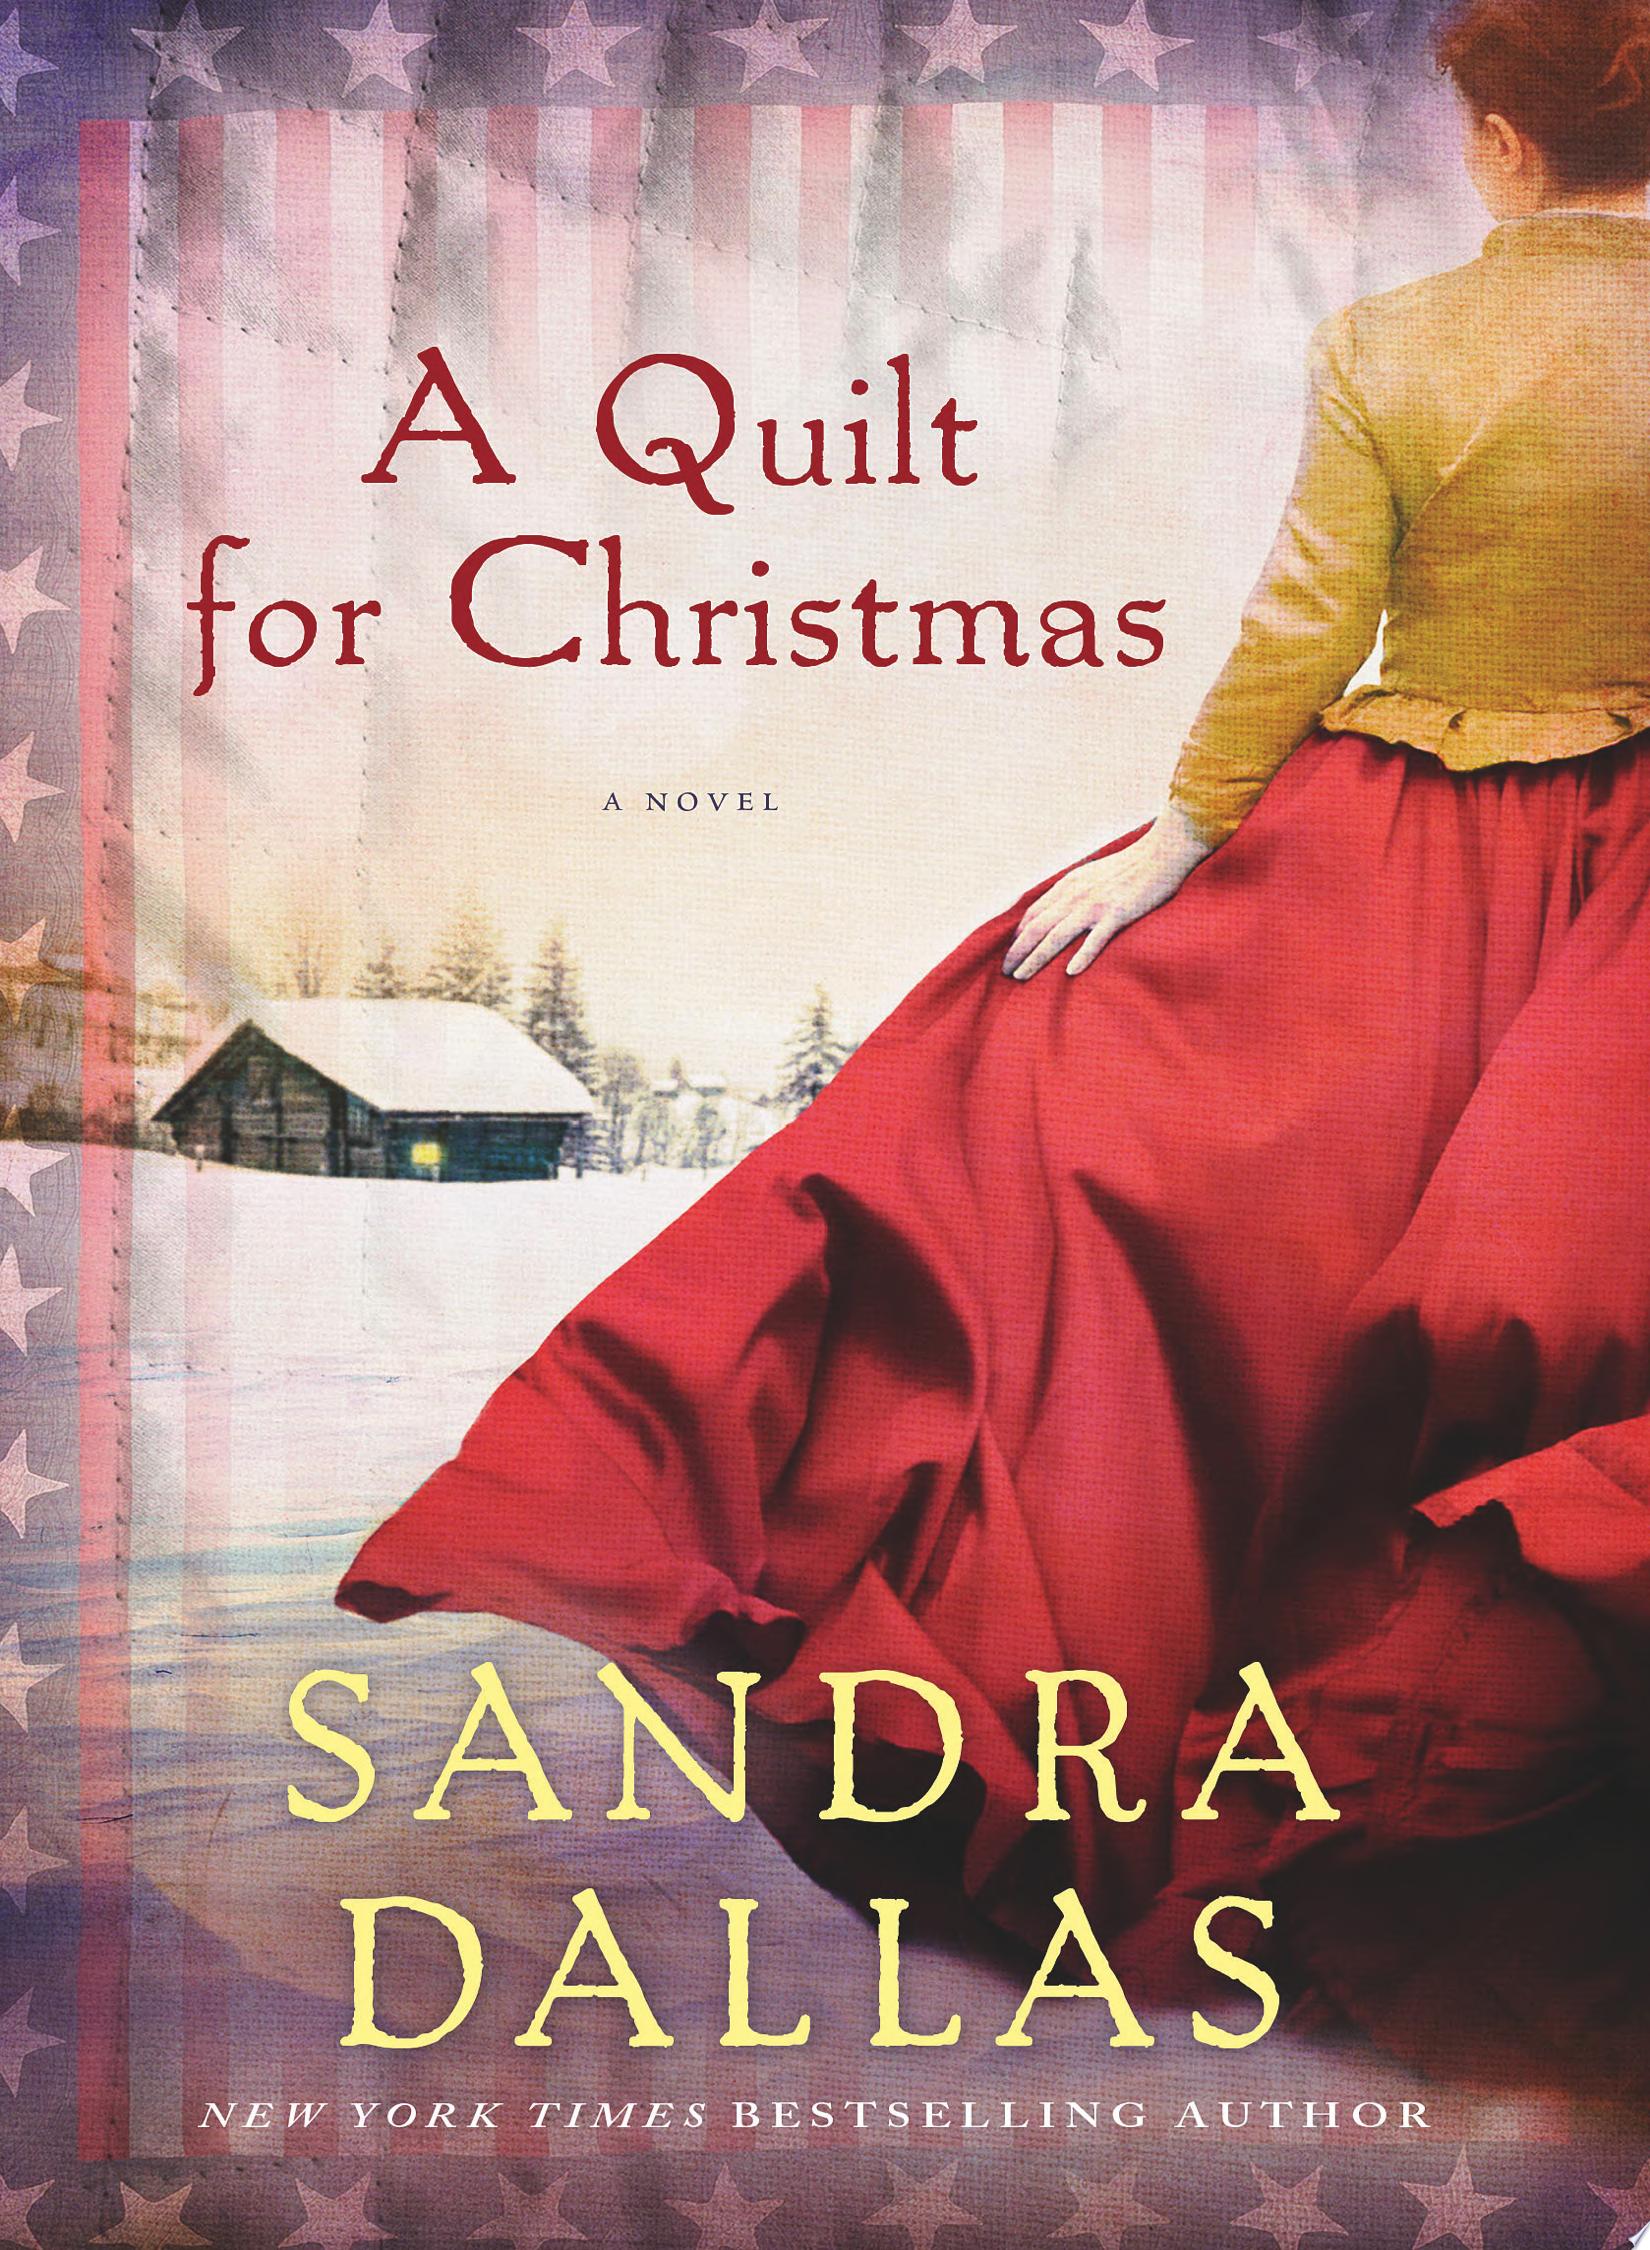 Image for "A Quilt for Christmas"